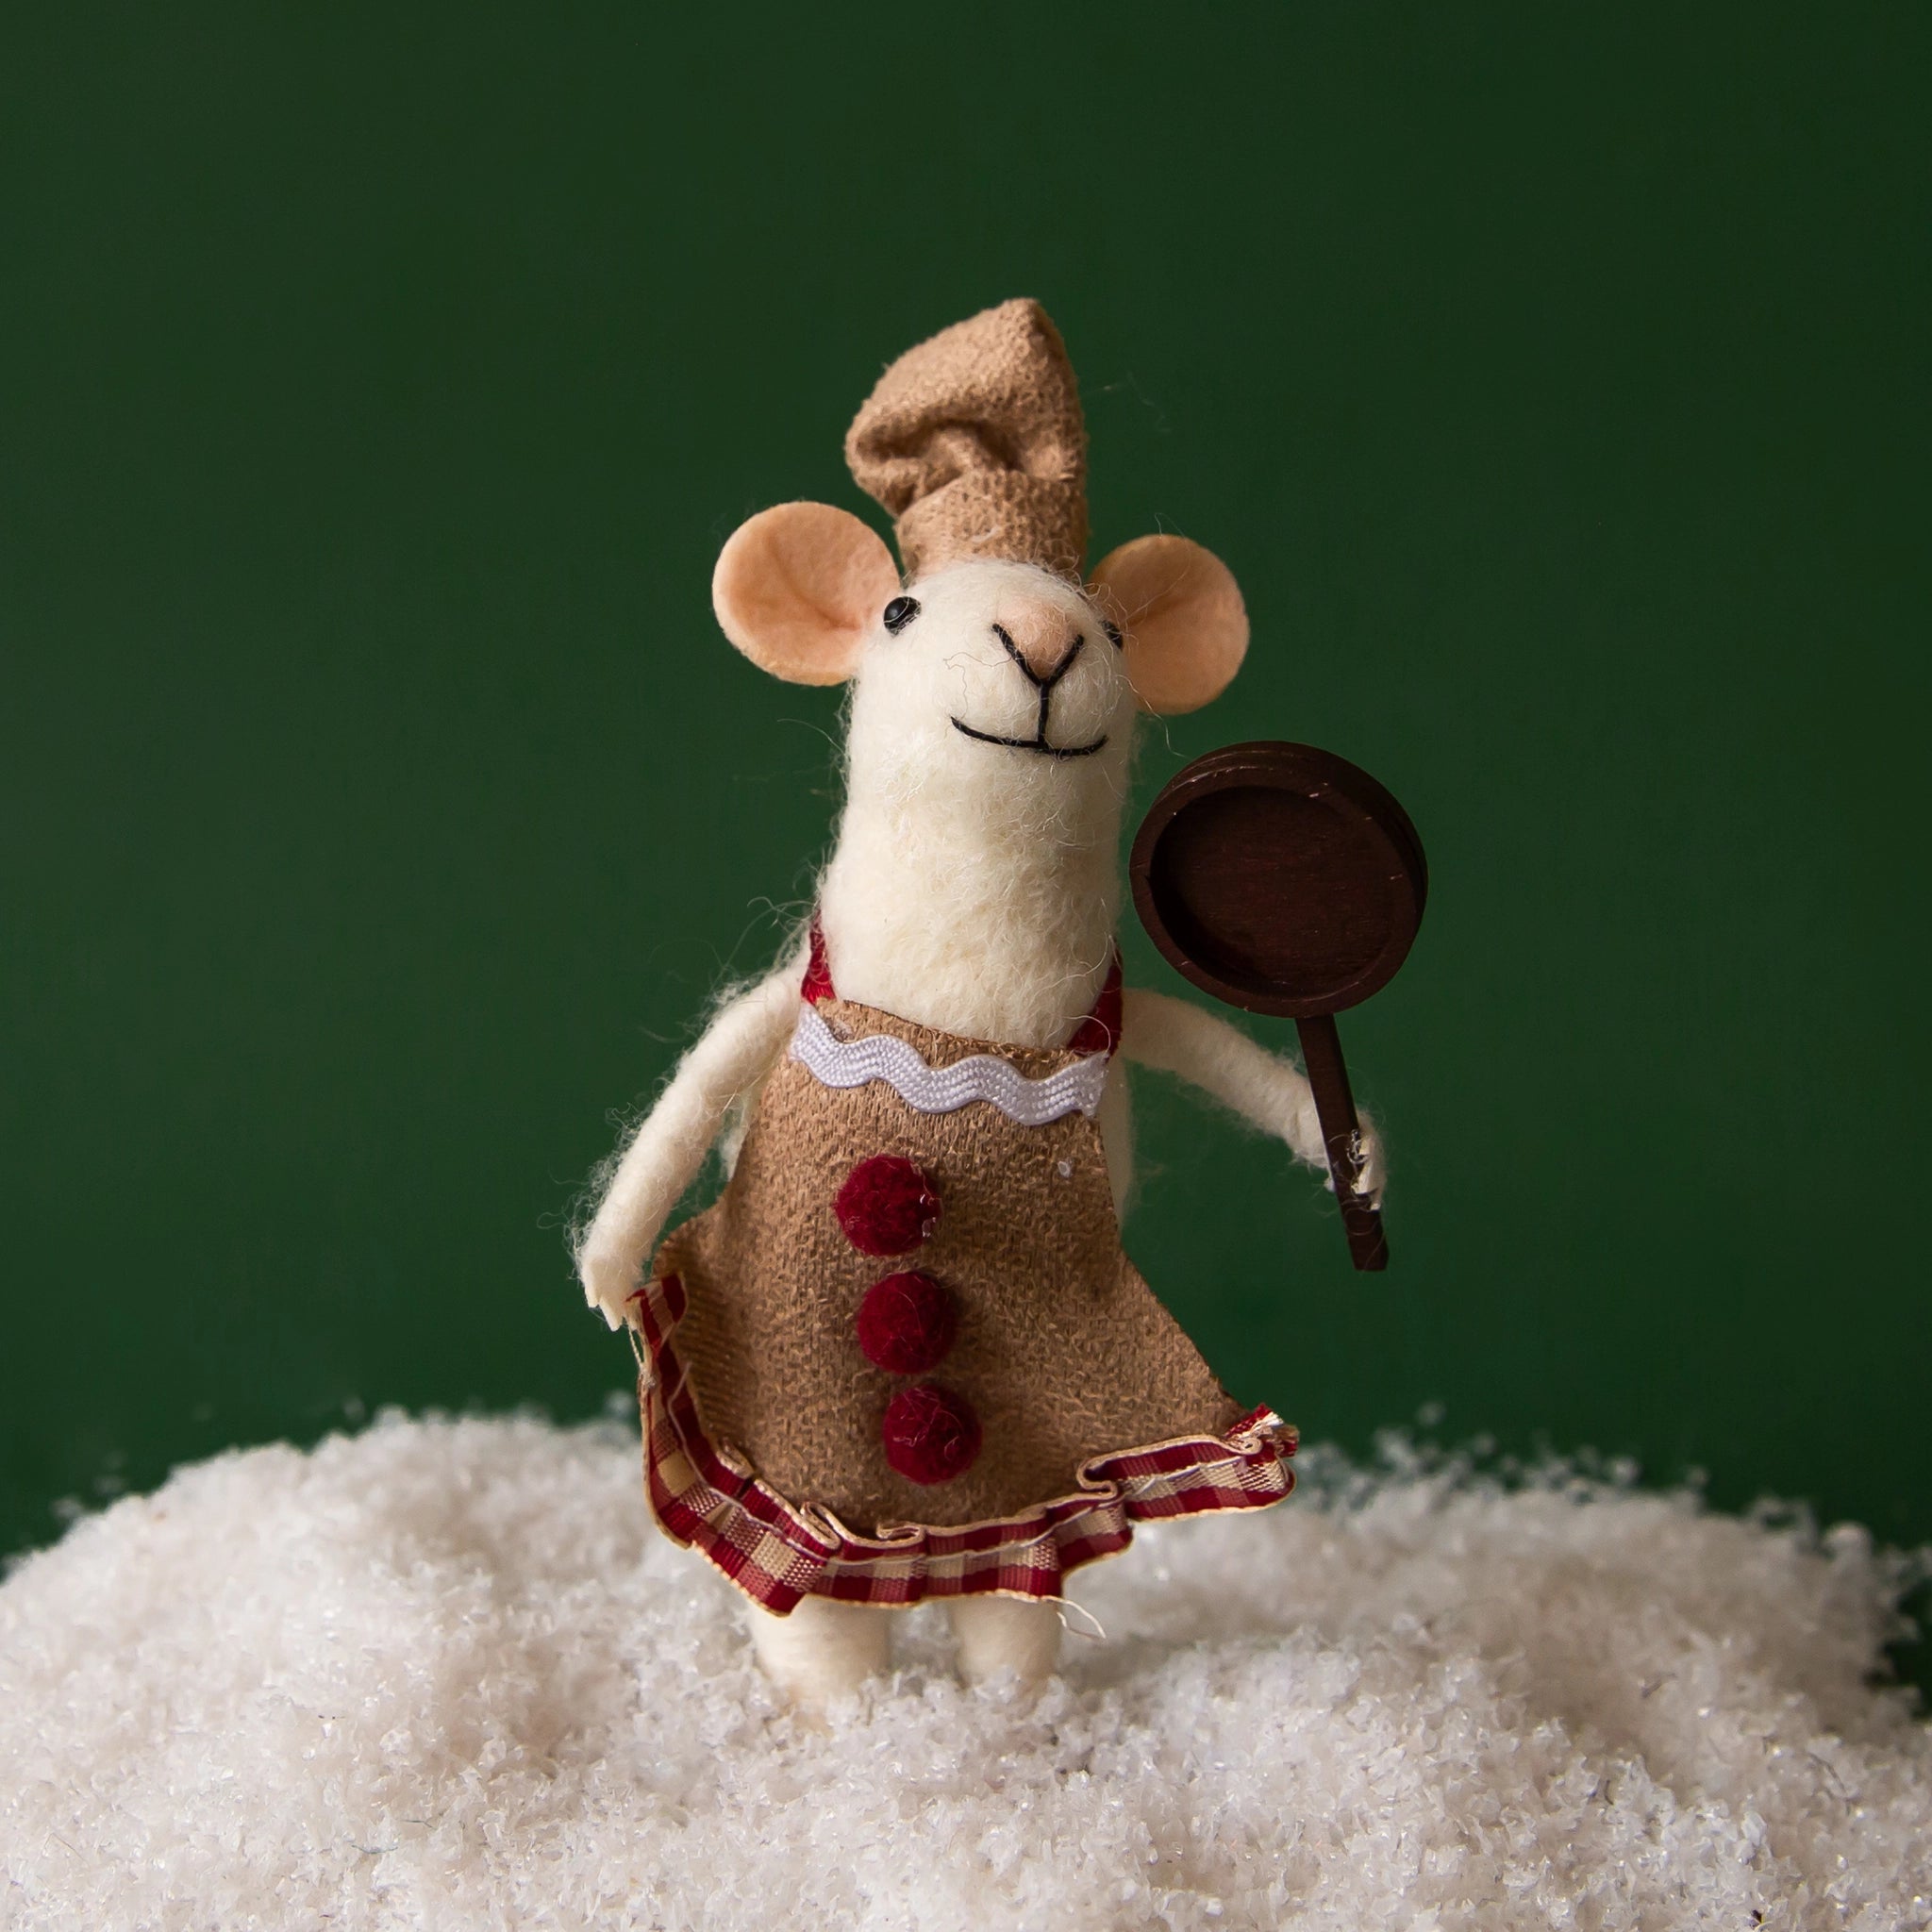 On a green background is a white felt mouse ornament with a brown and red apron on with a wood sauce pan in its hand. 